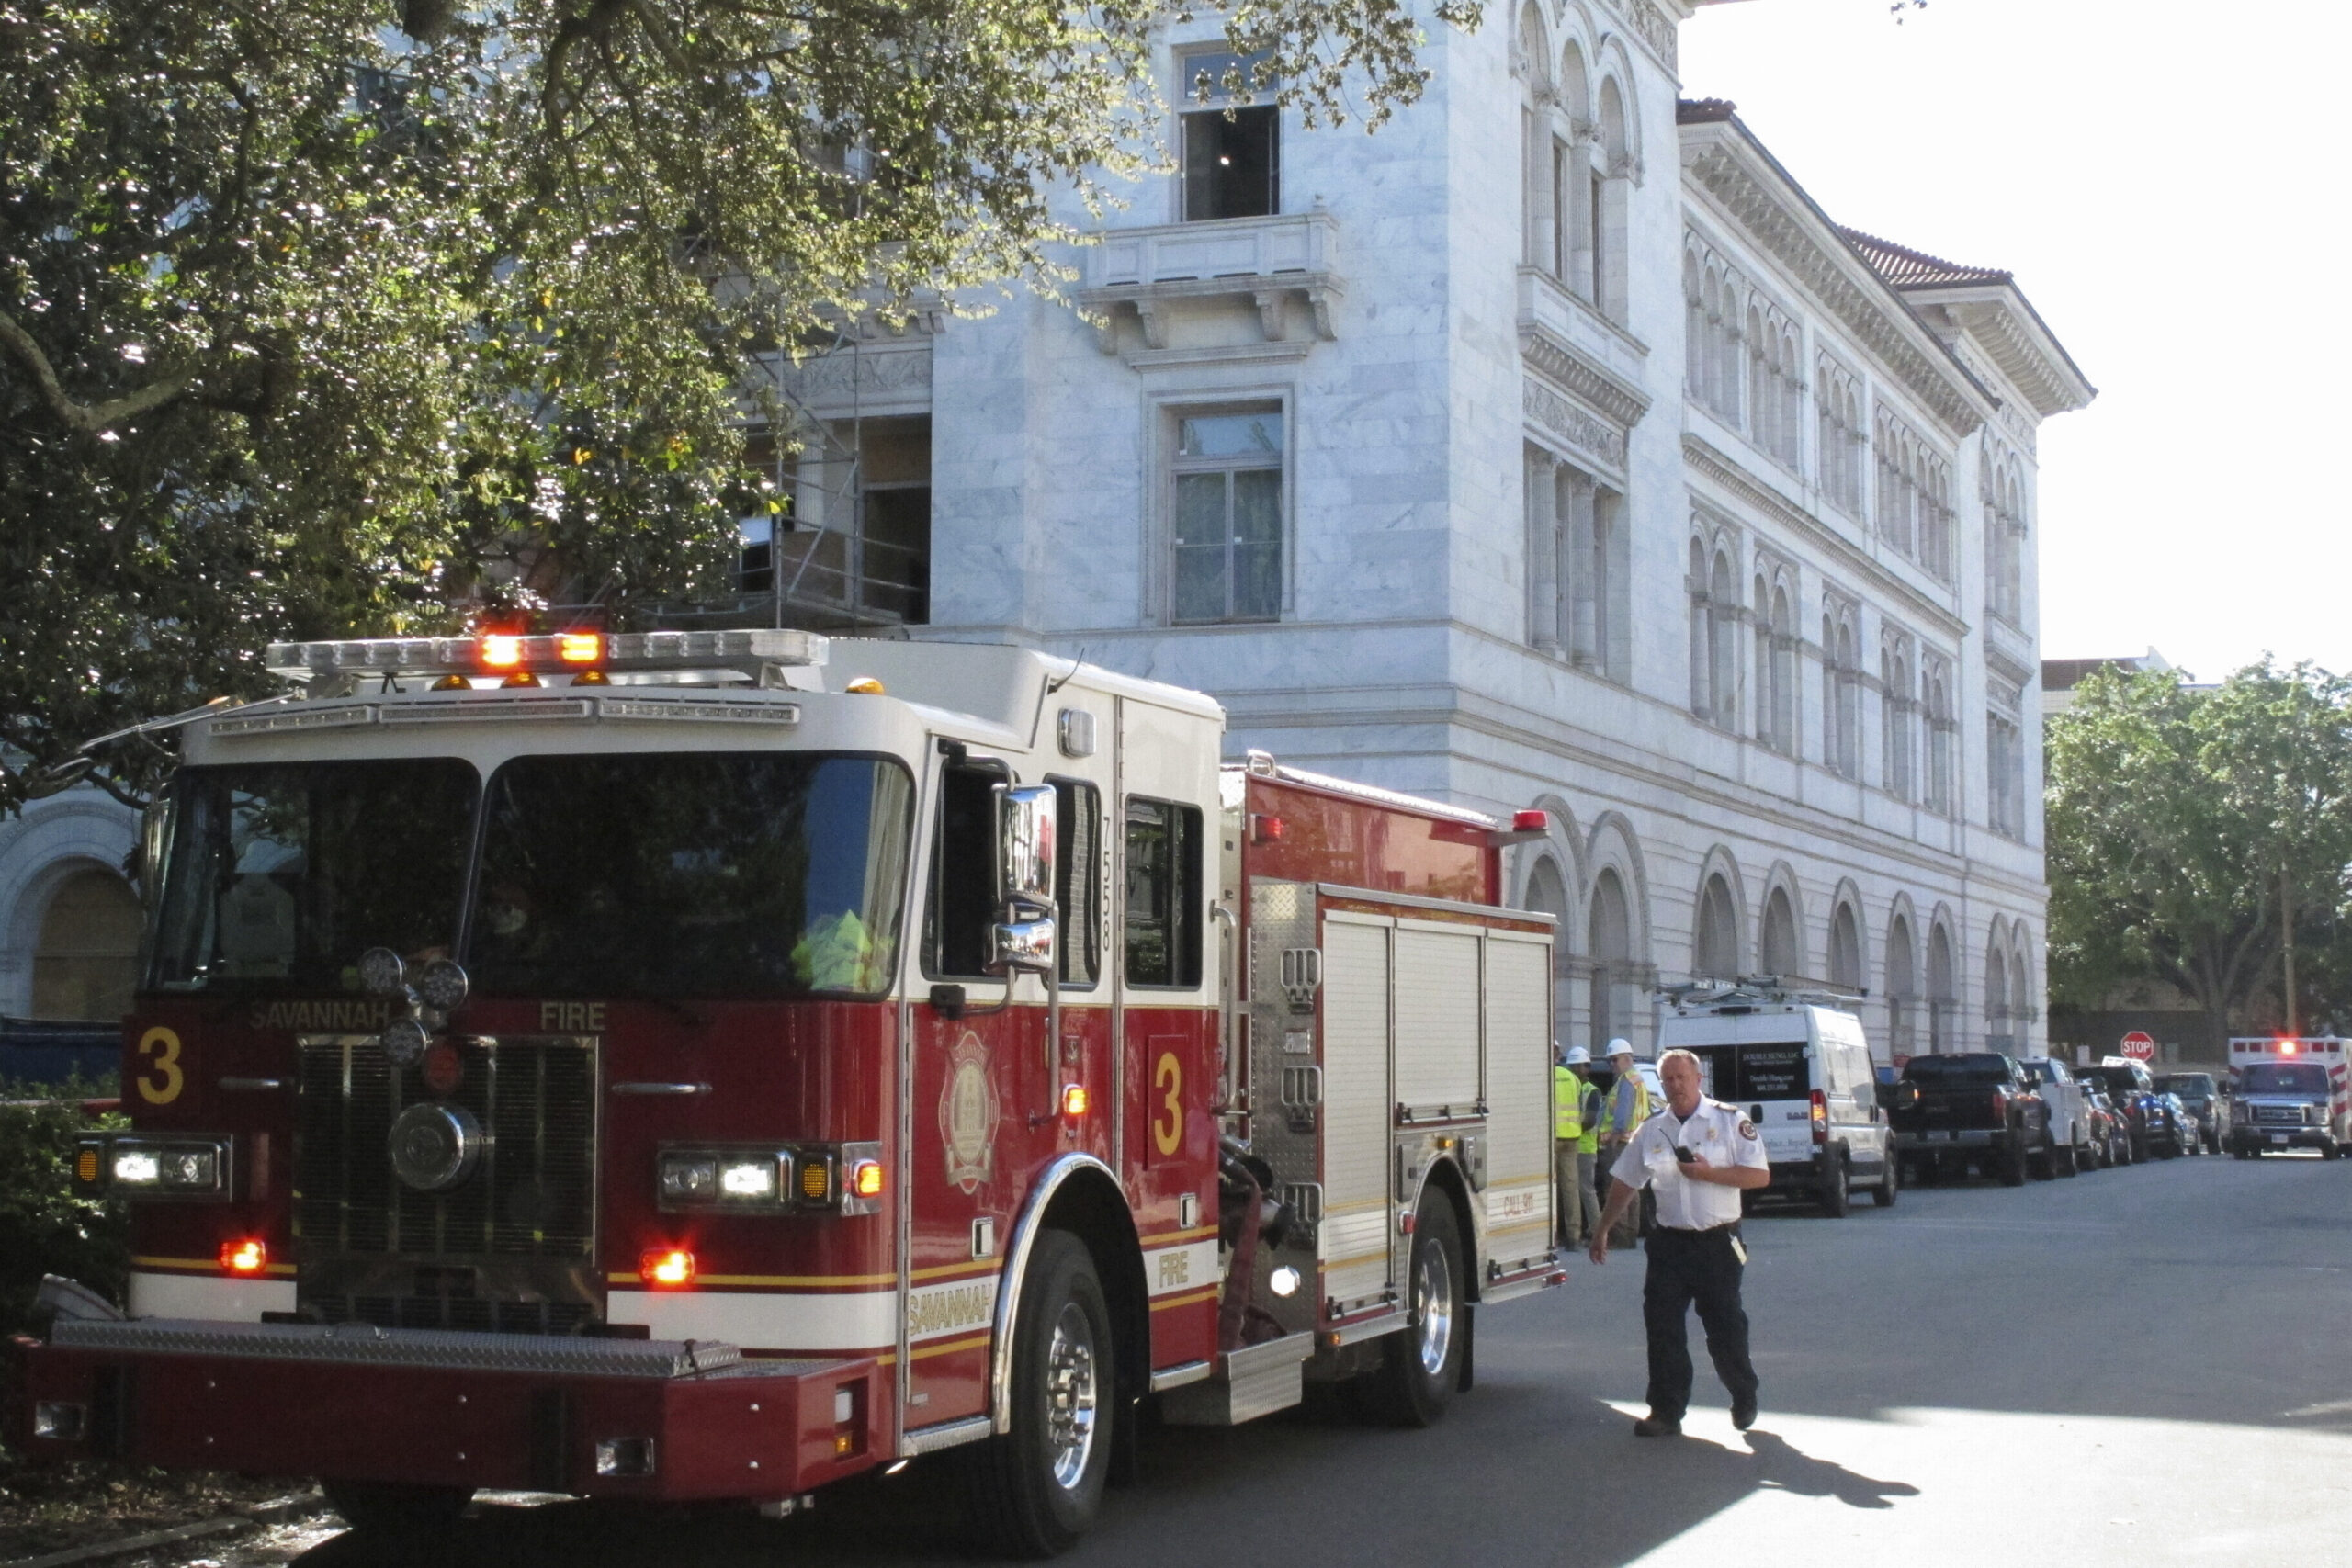 3 Hurt in Floor Collapse in Savannah s 1899 US Courthouse